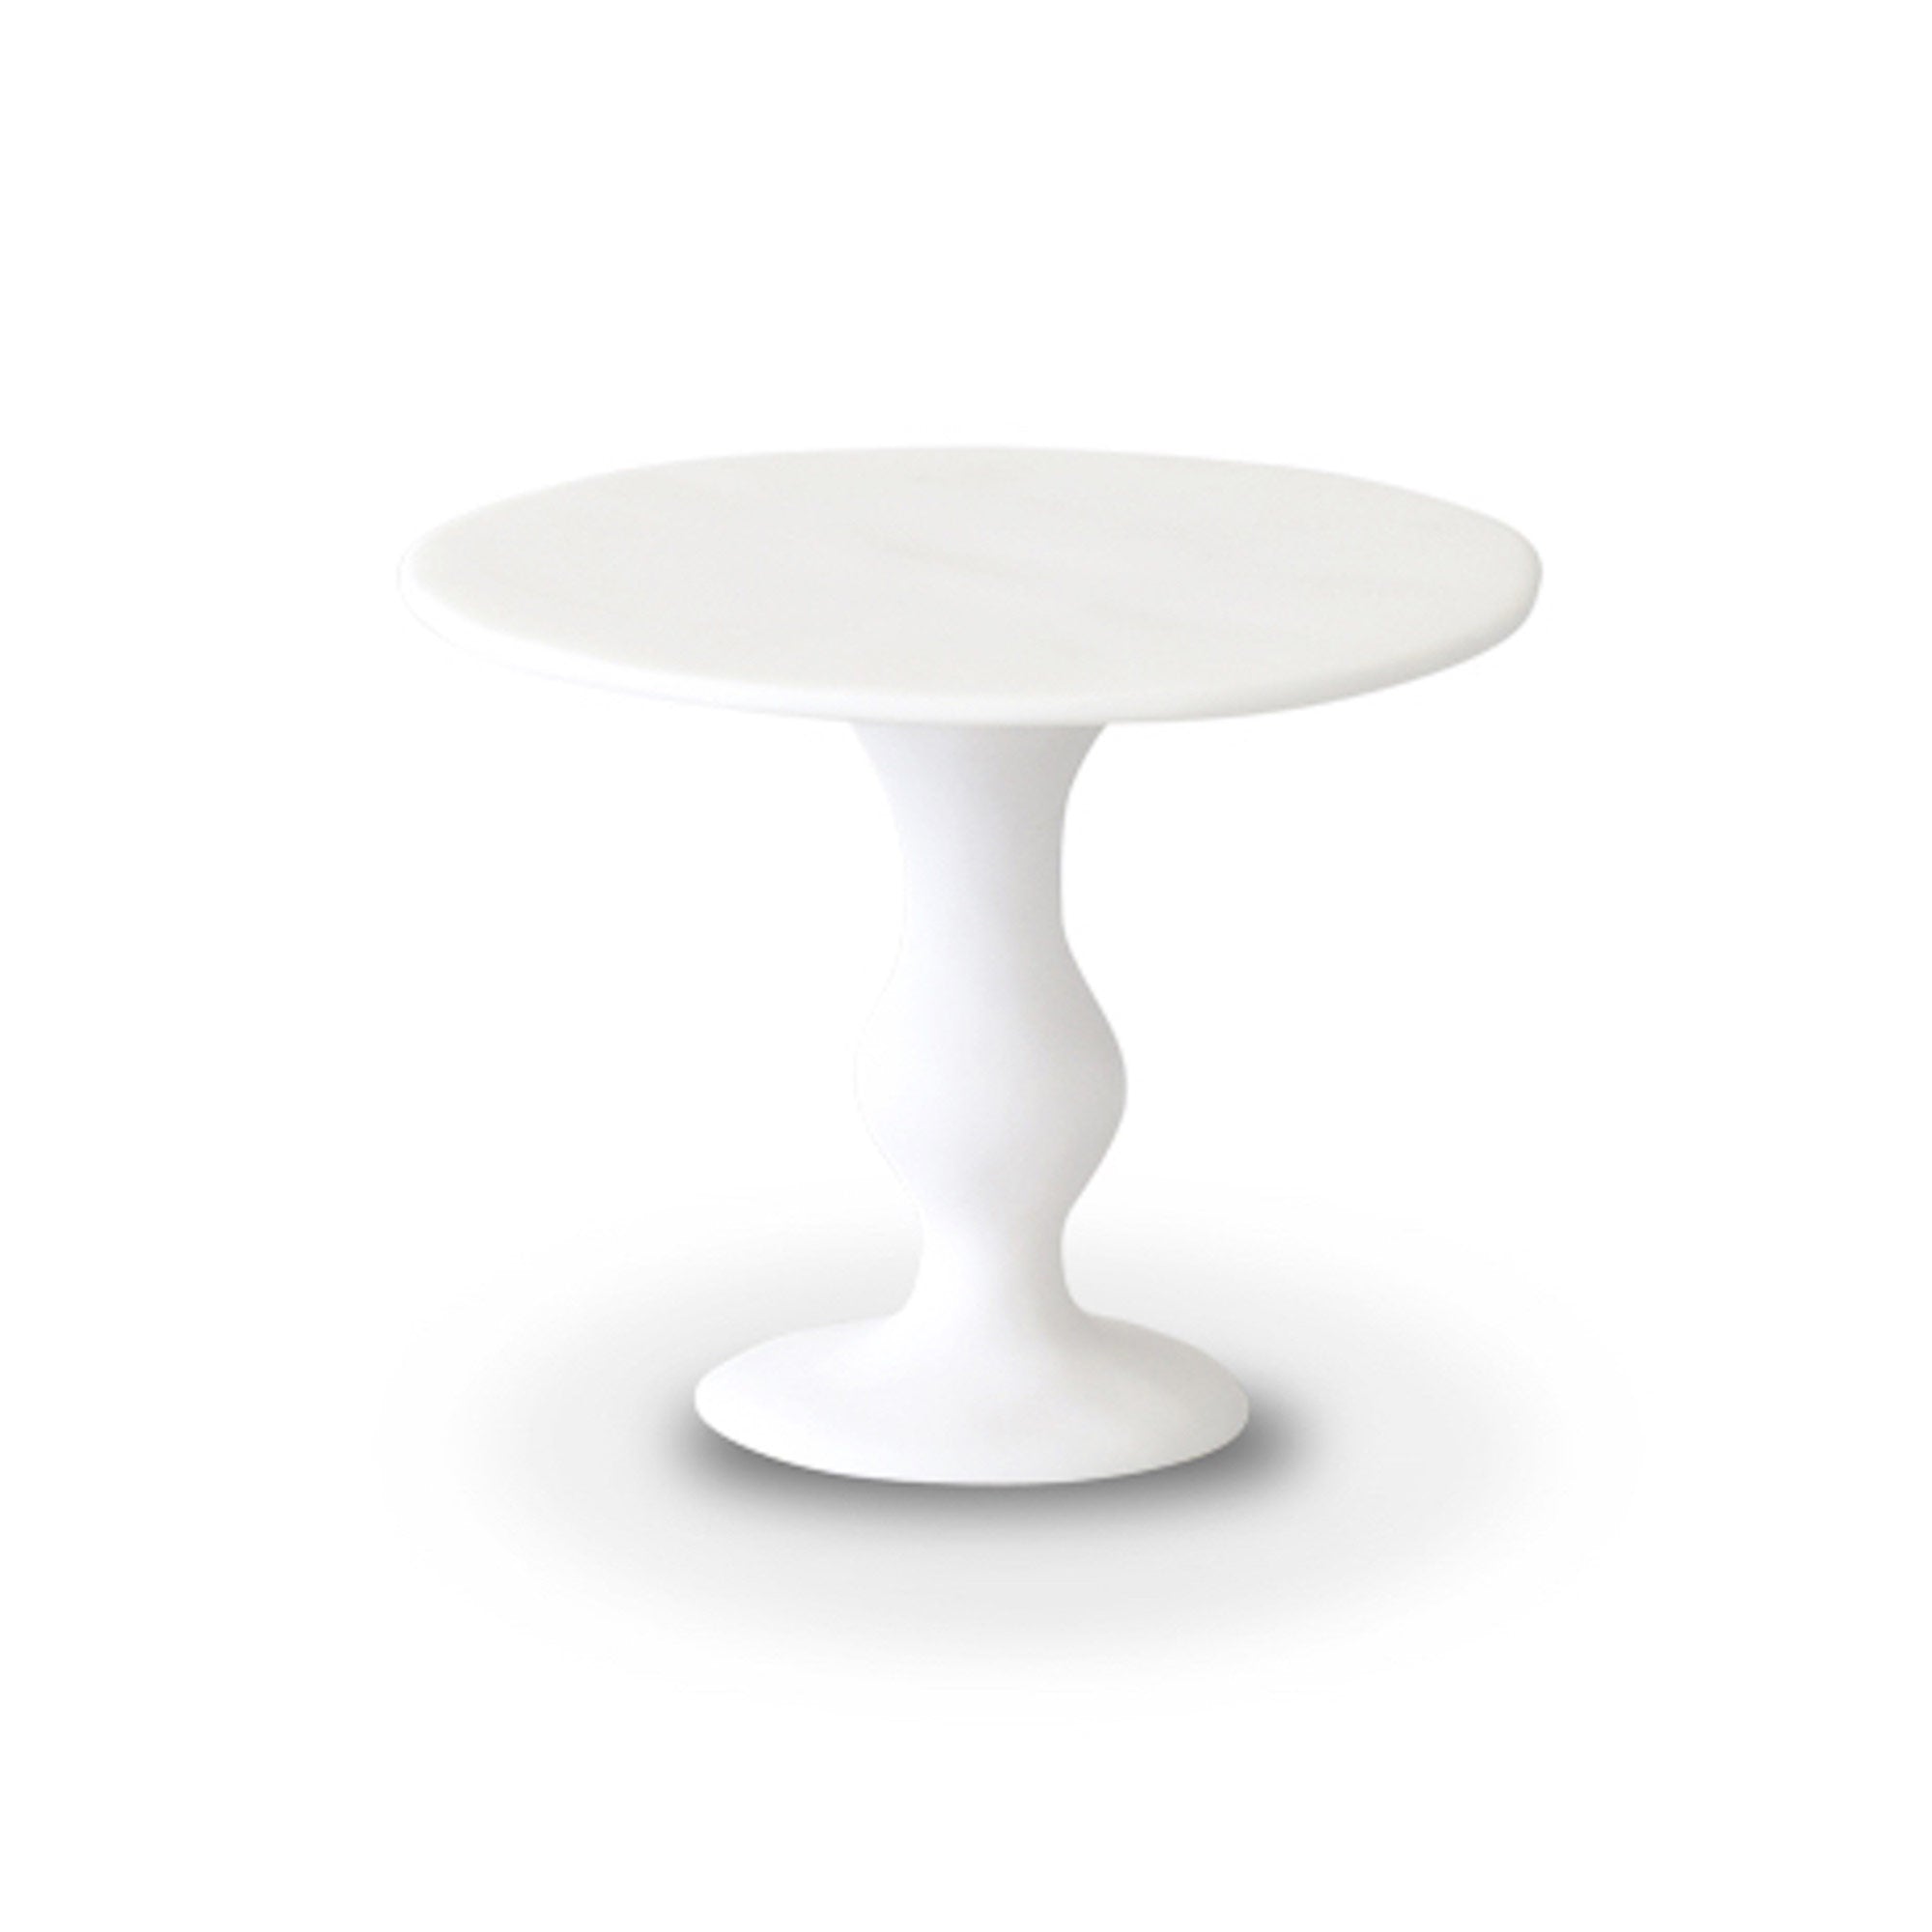 Small Pedestal Cake Stand